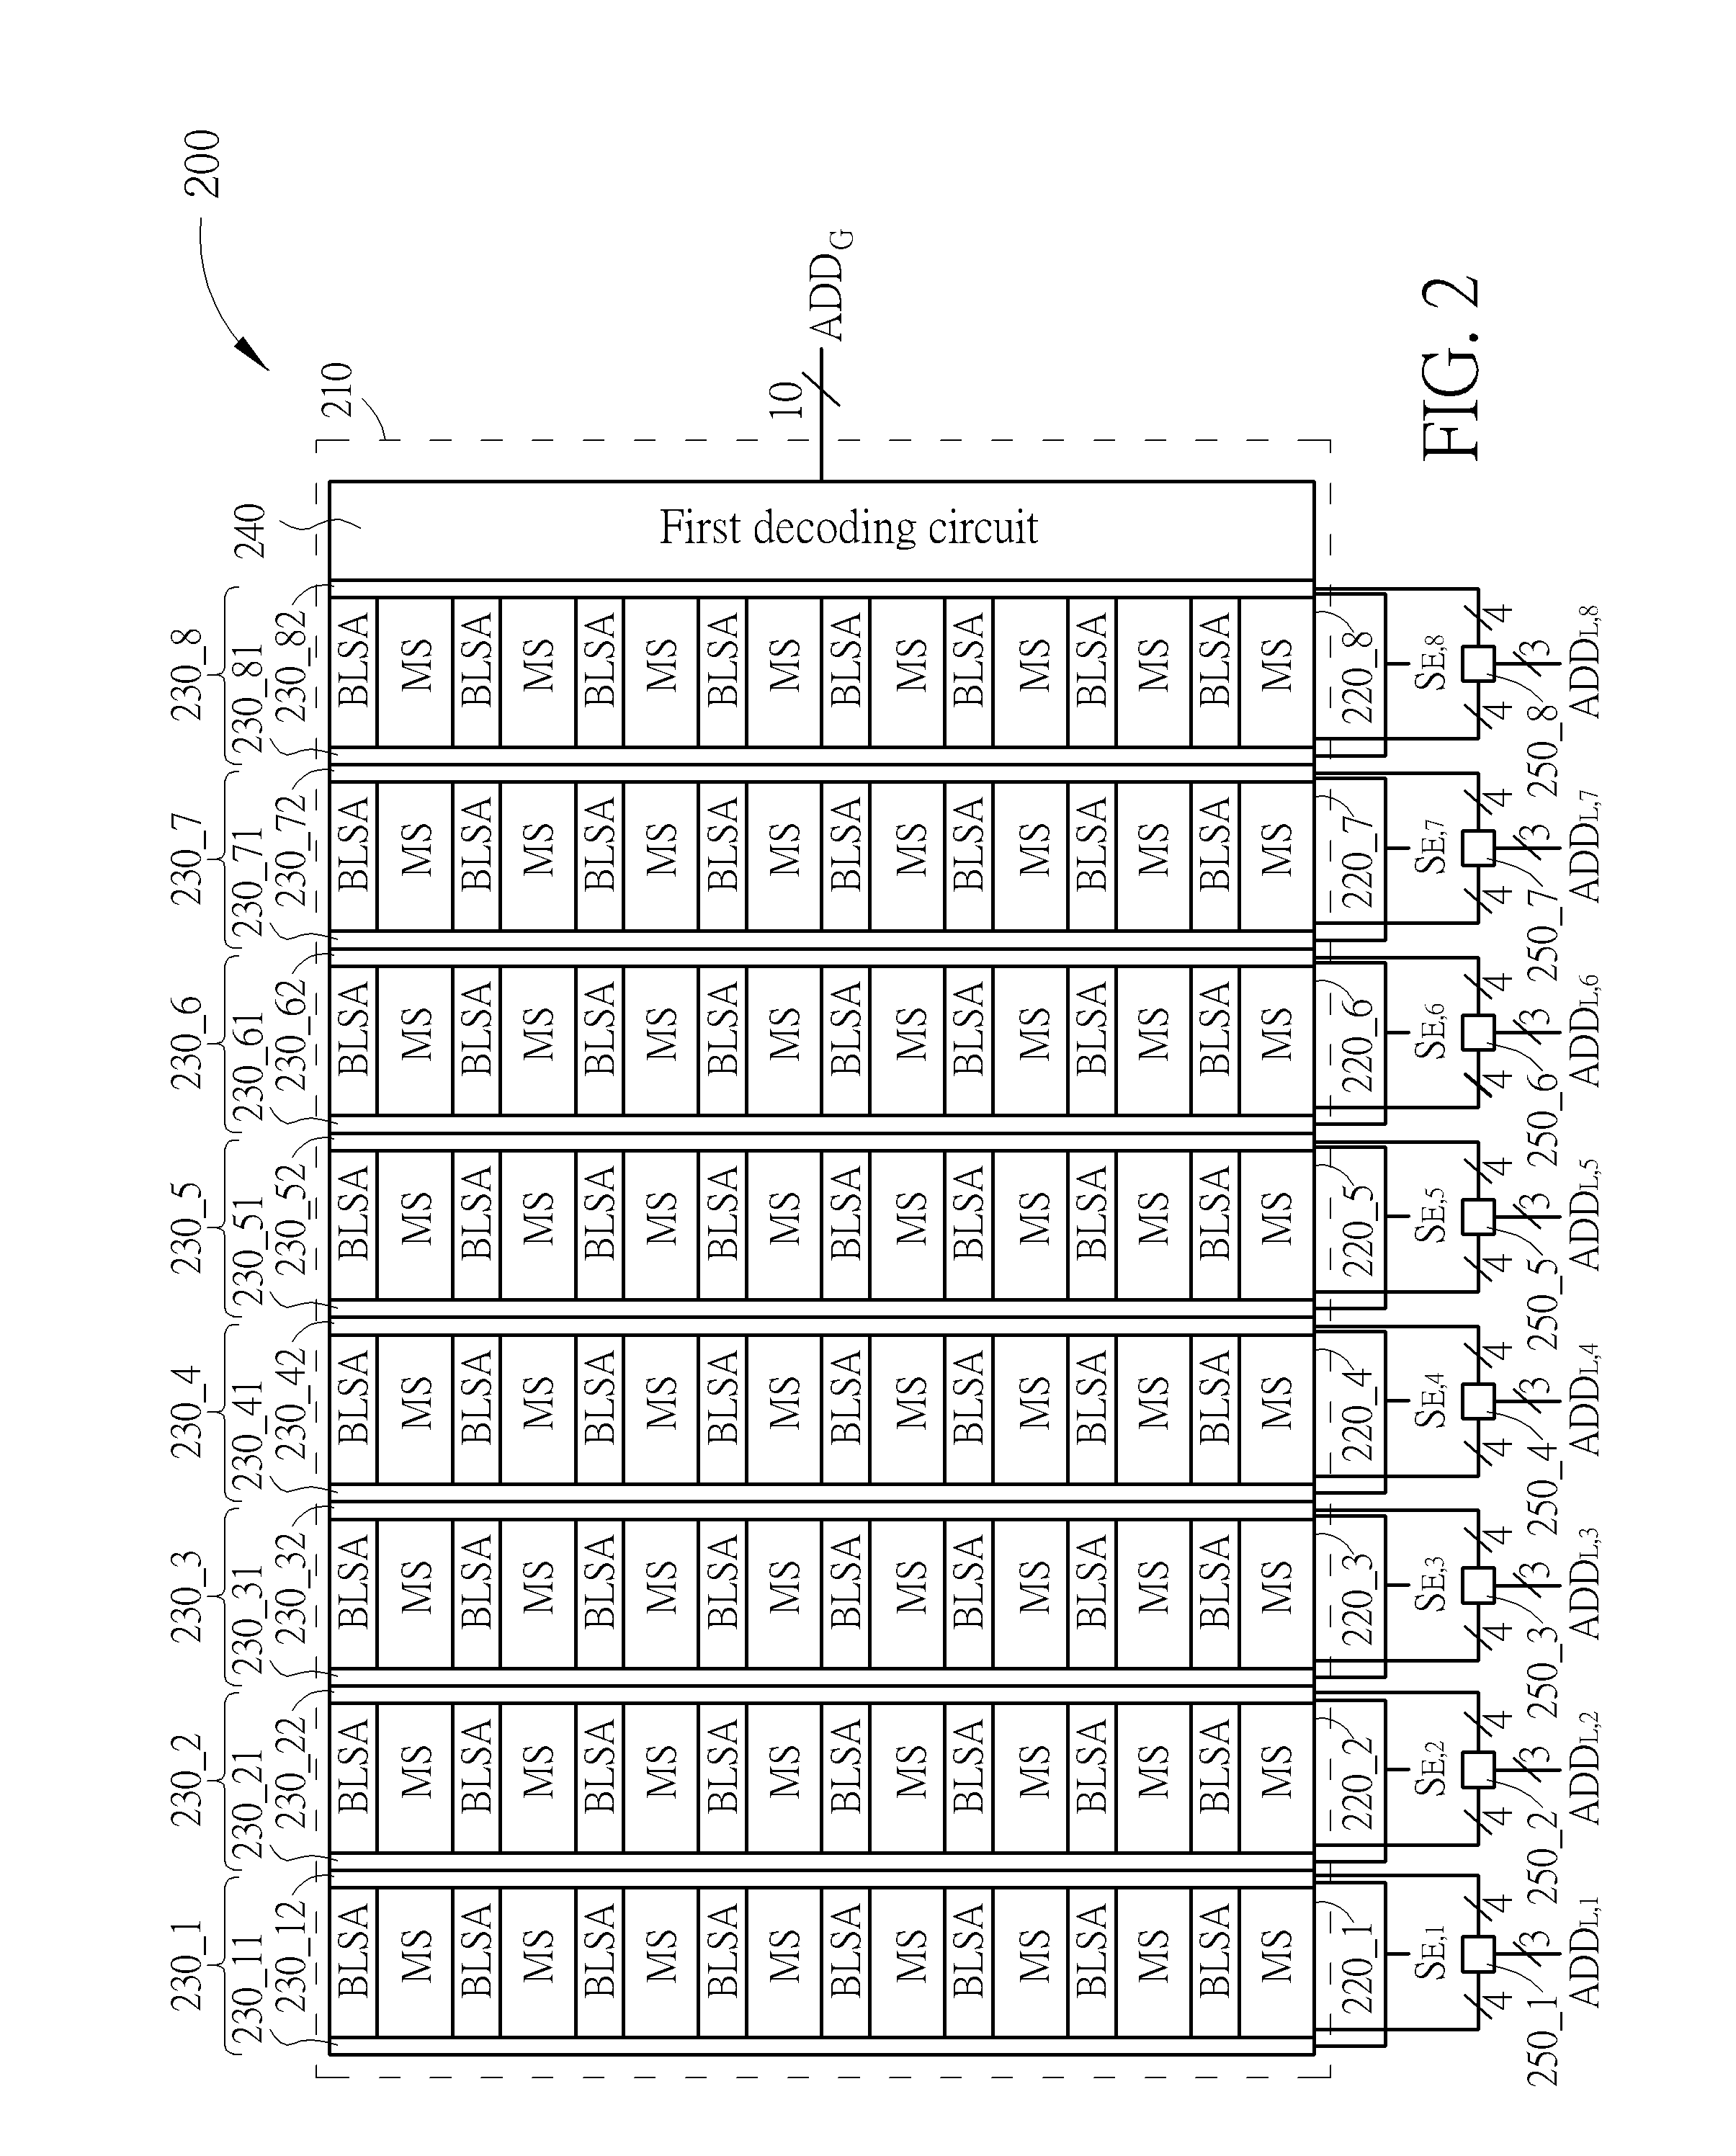 Memory architecture dividing memory cell array into independent memory banks